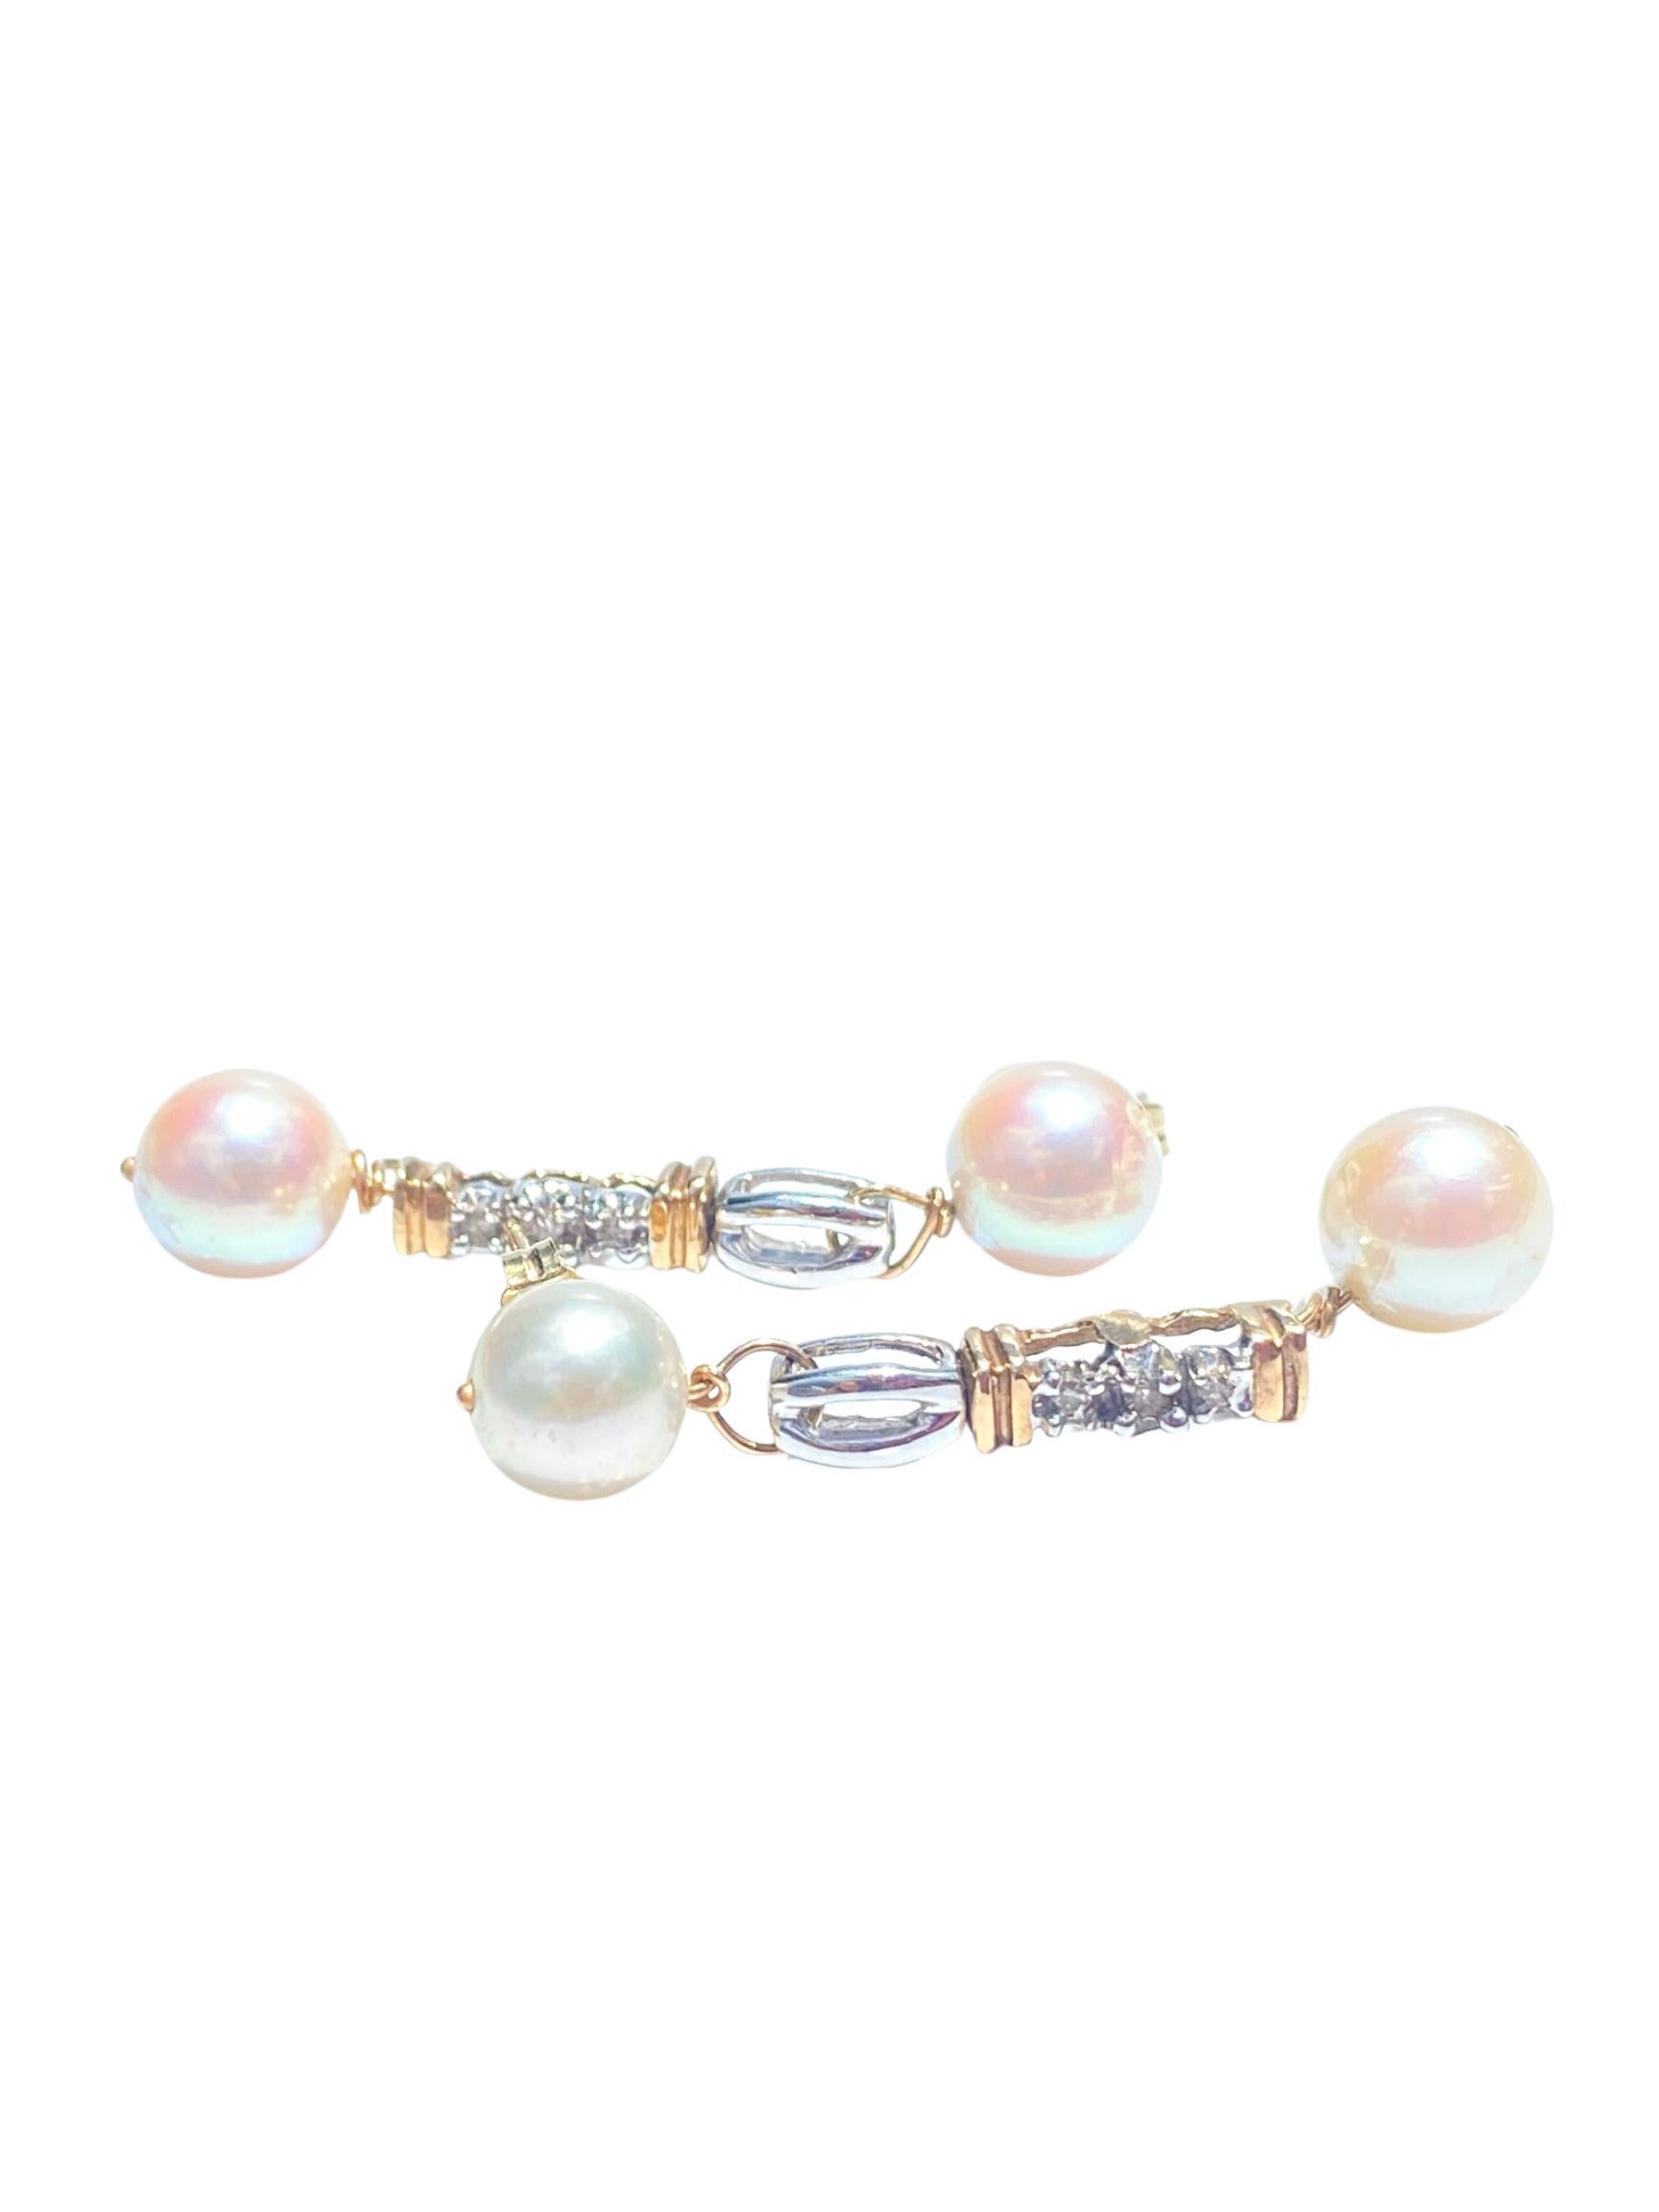 Retro South Sea Pearl and Round-Cut Diamond 14K White/Yellow Gold Drop Earrings For Sale